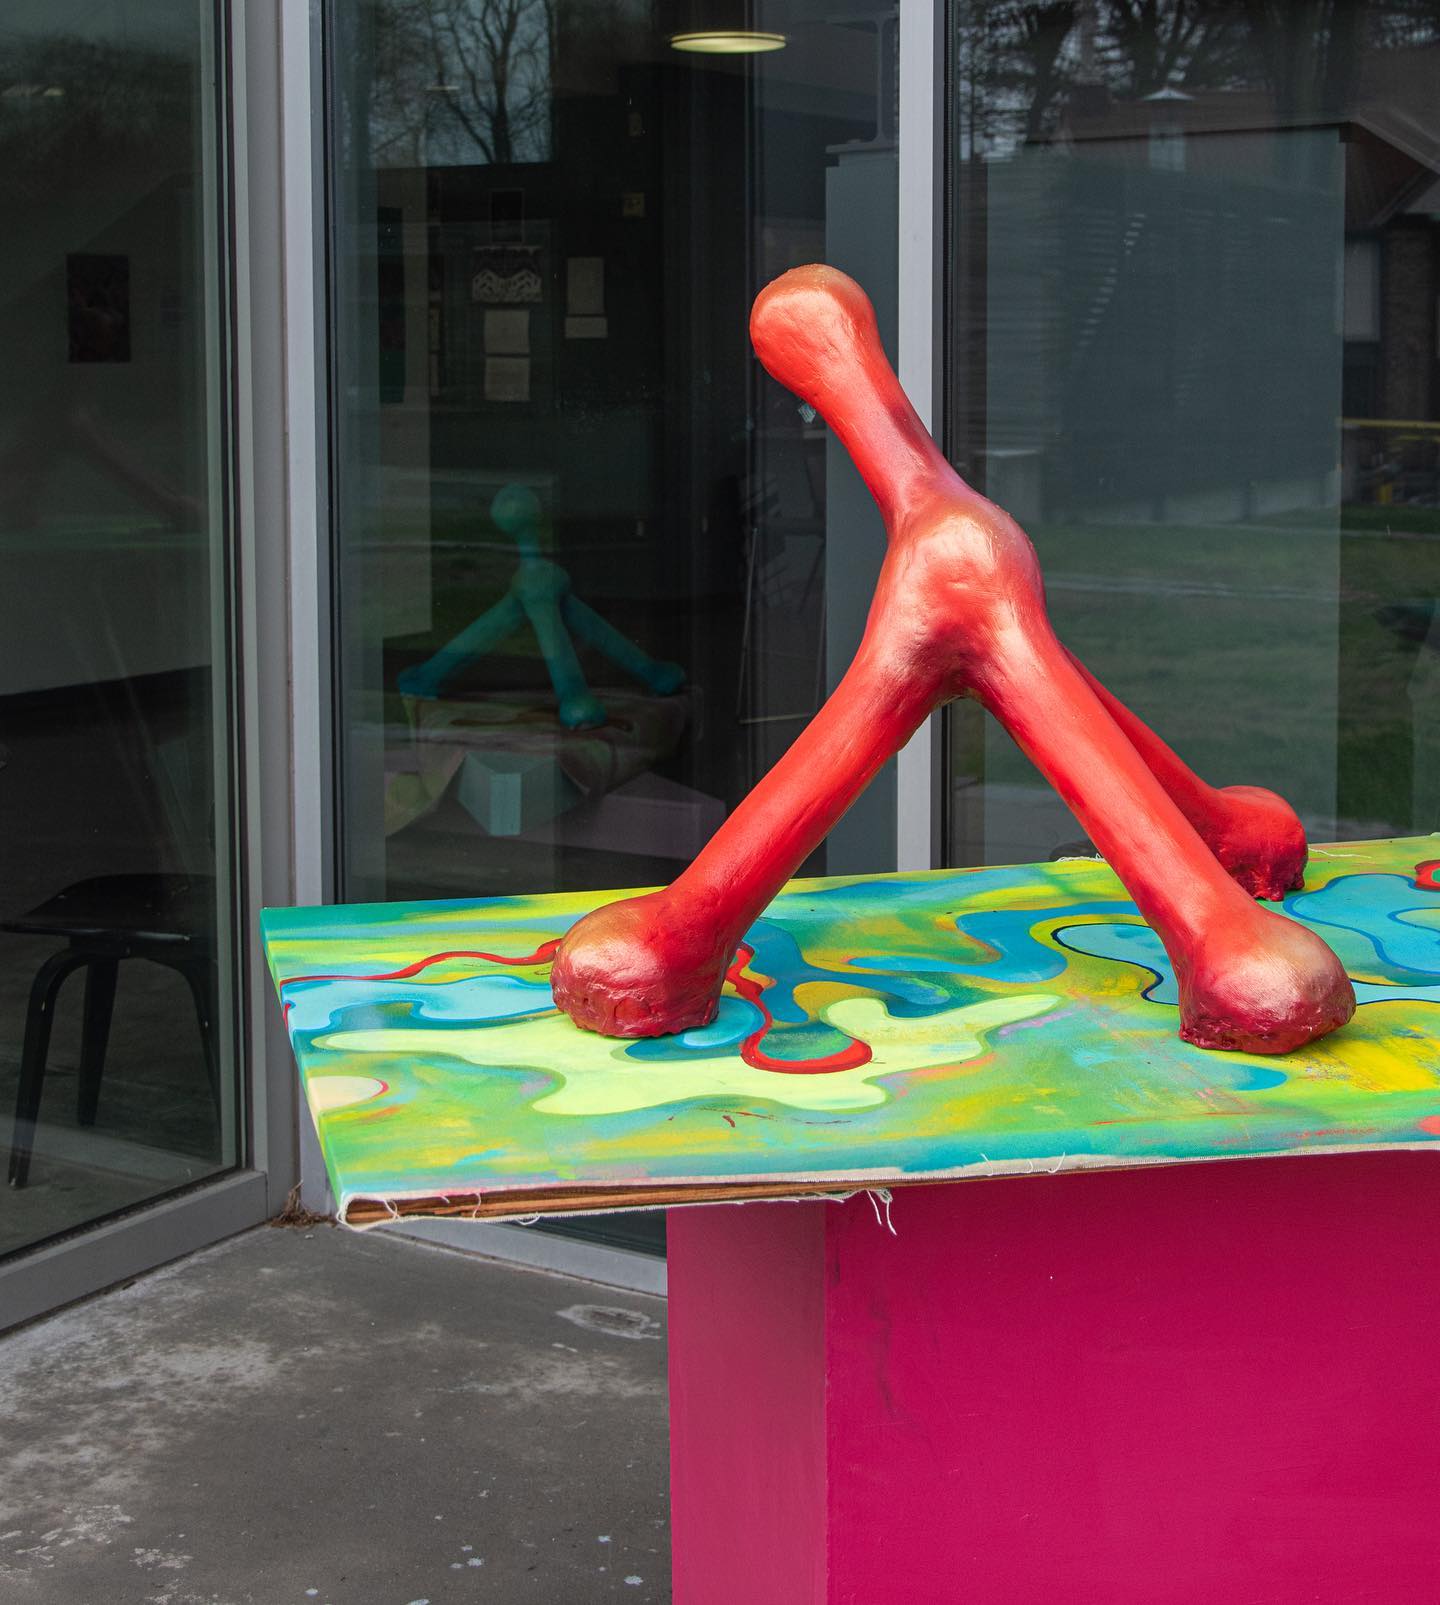 Colorful abstract sculpture on a vibrantly painted surface, near a glass door.